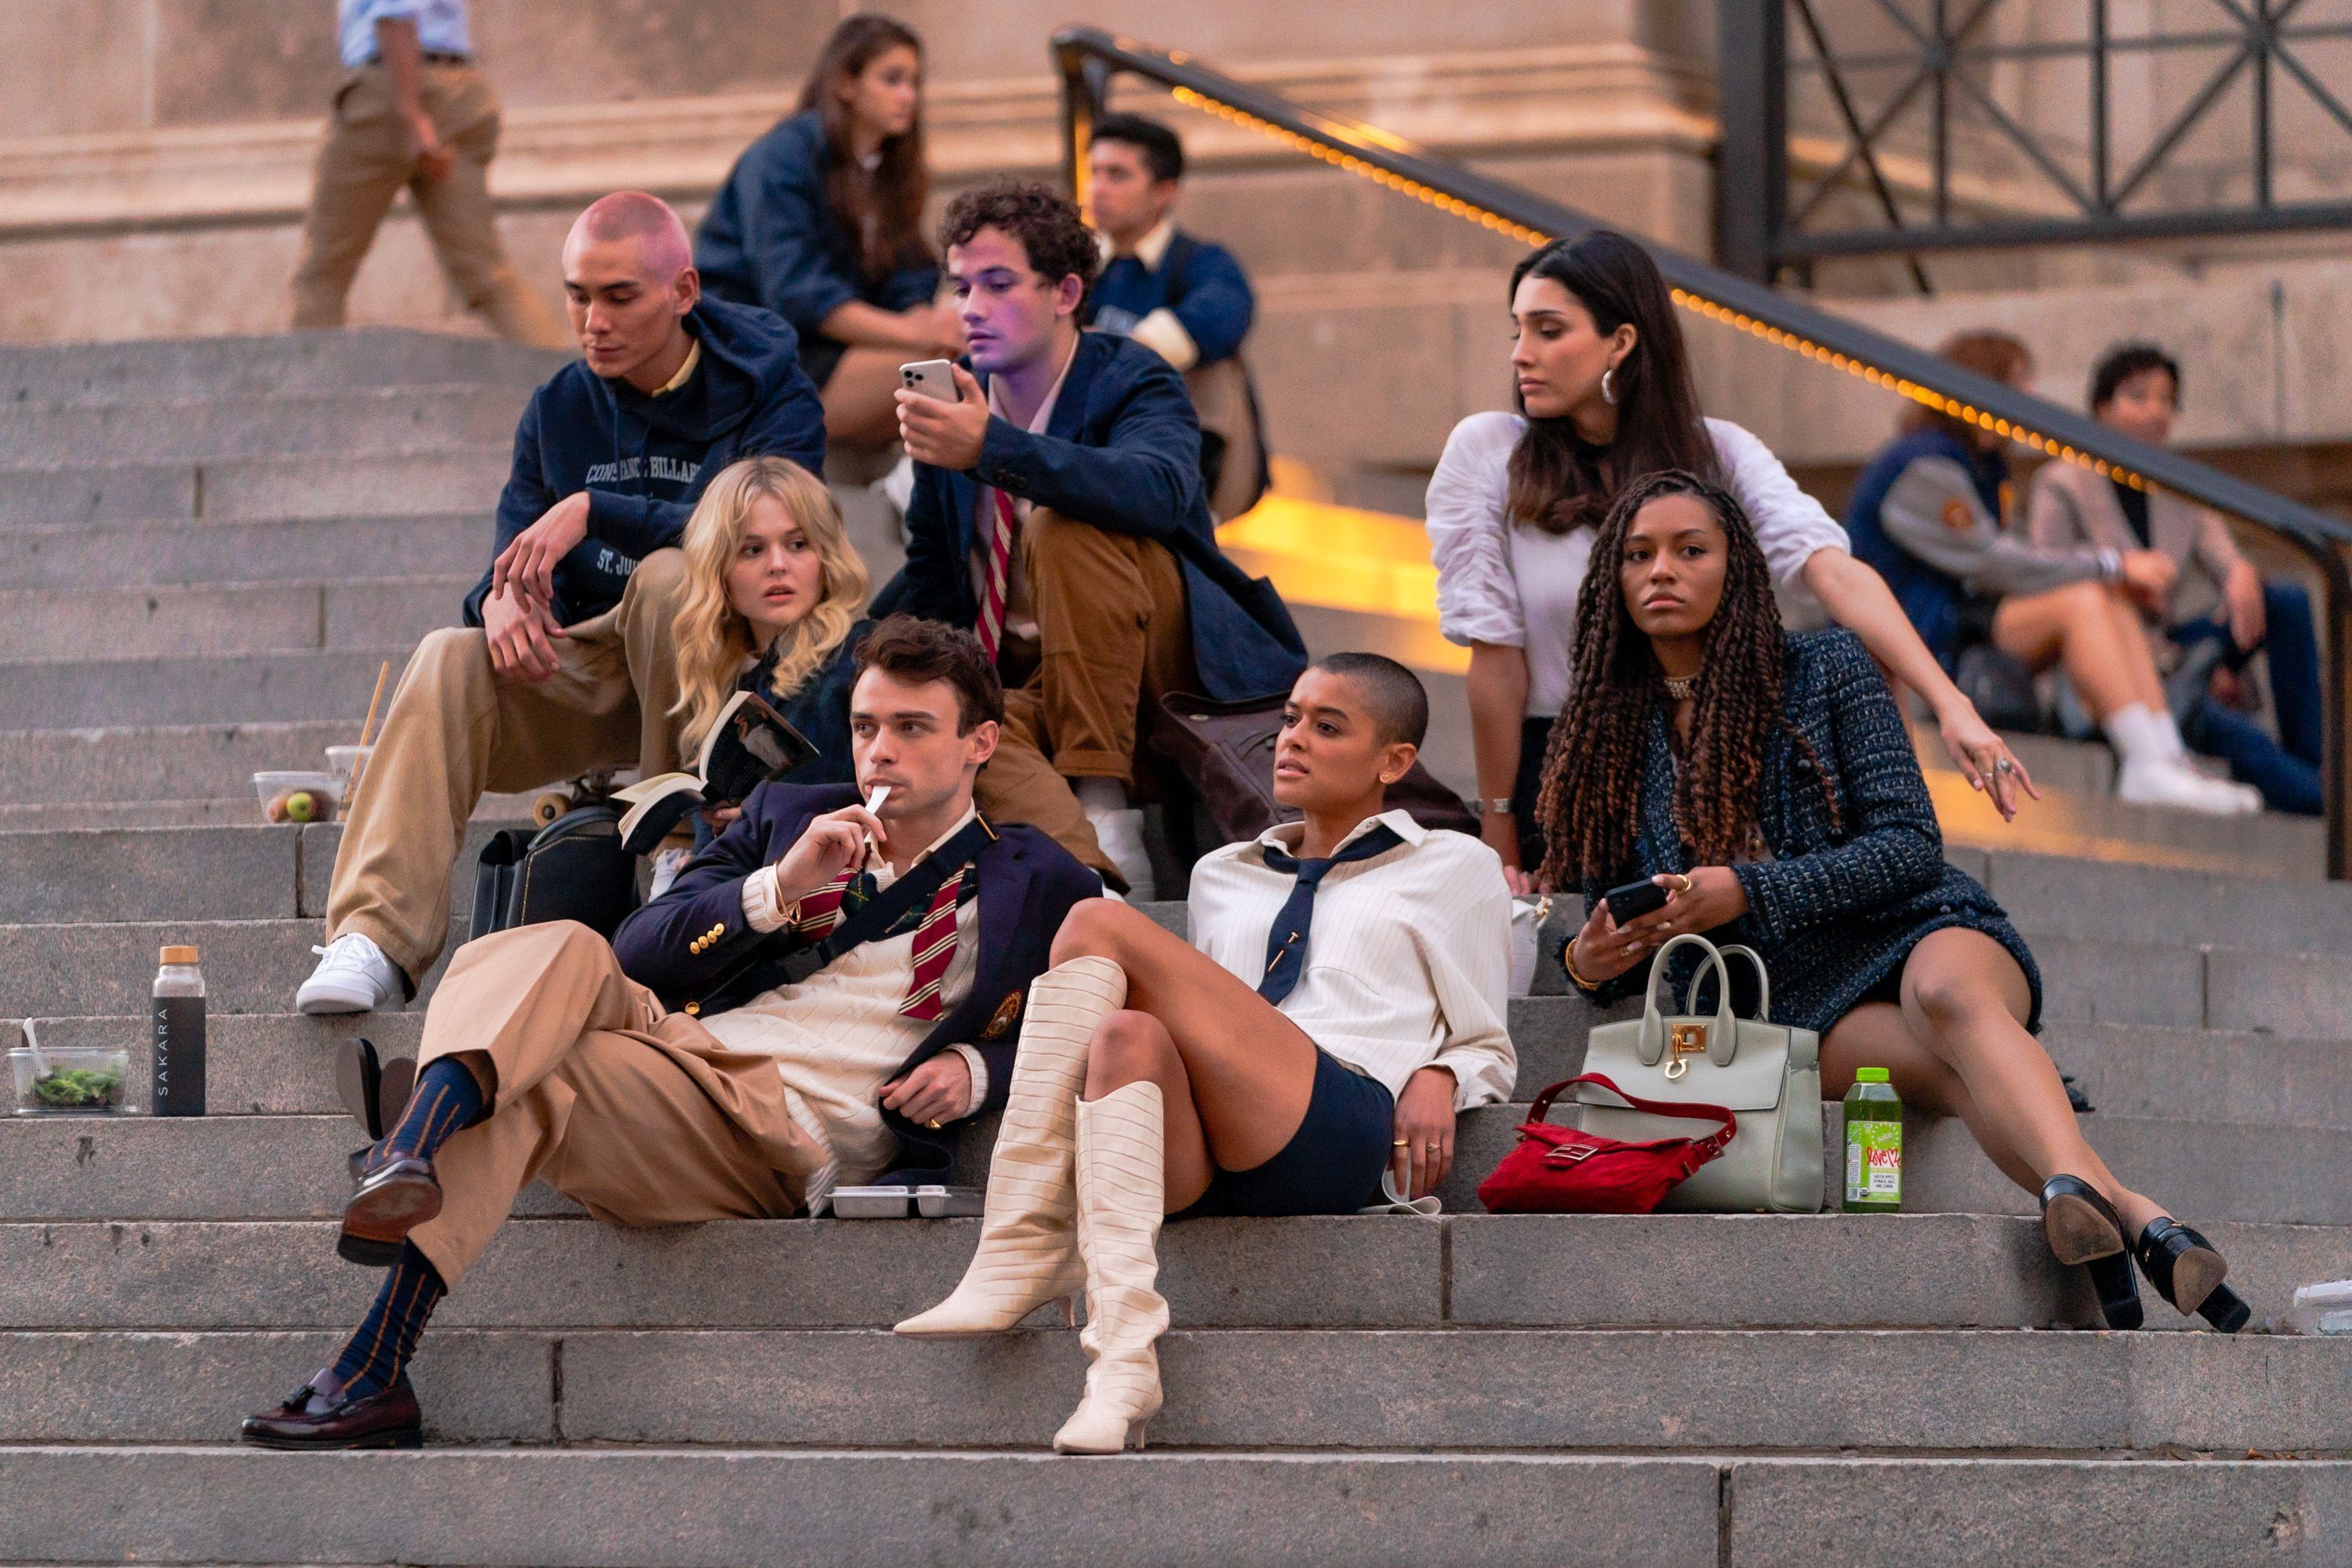 New Gossip Girl HBO Max Reboot: Release Date, Cast, News and More -  Thrillist